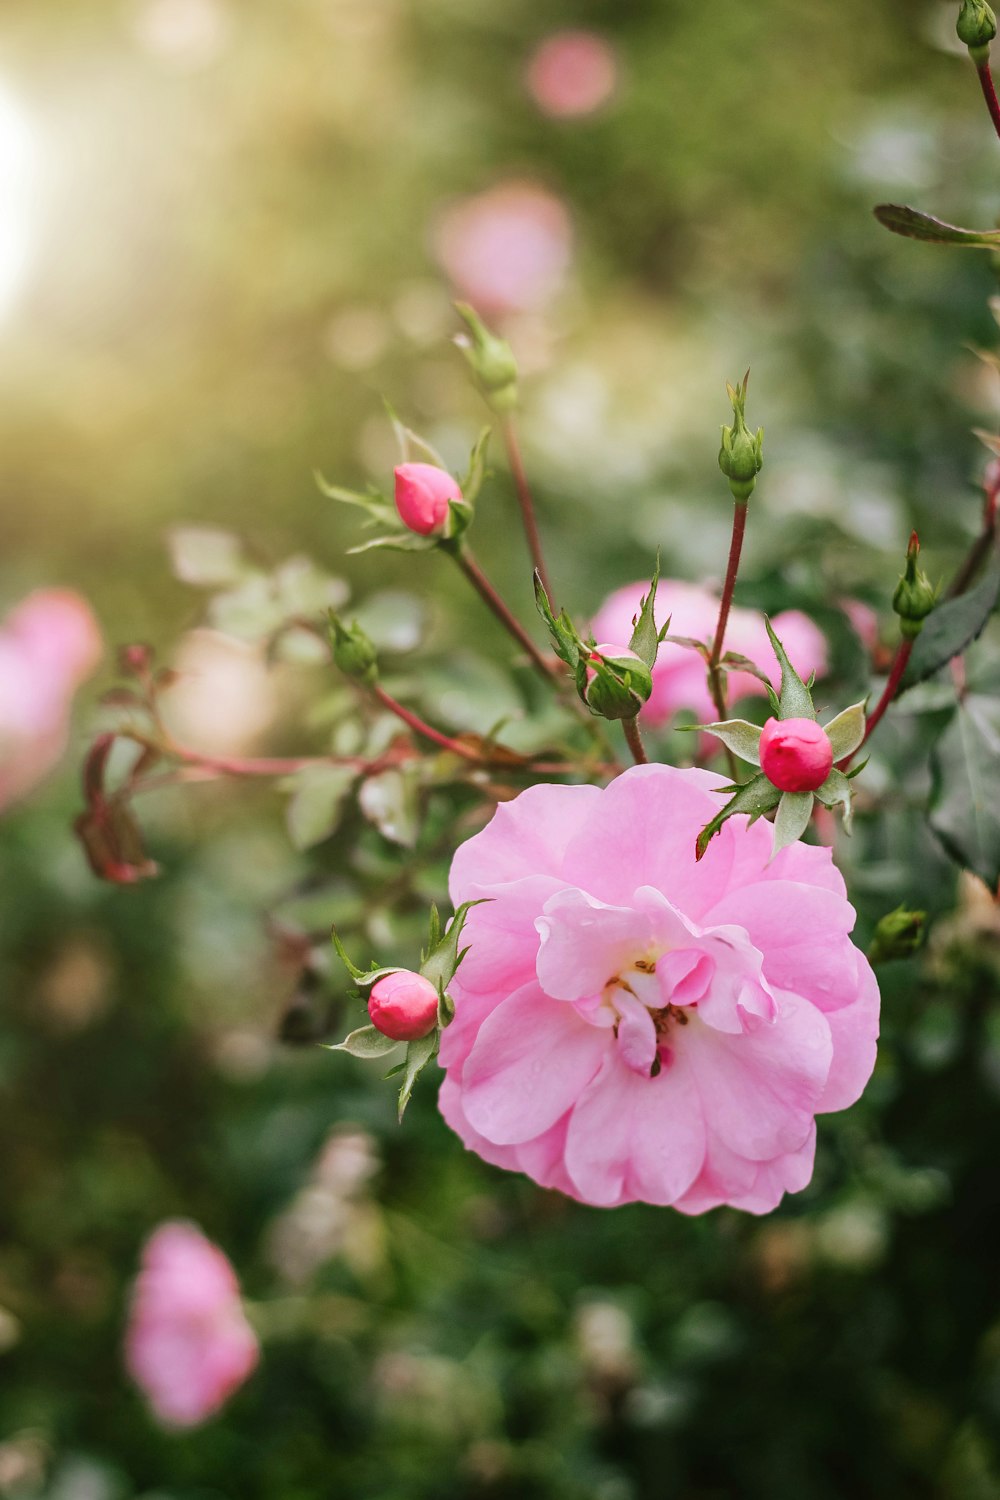 photo of pink flowers